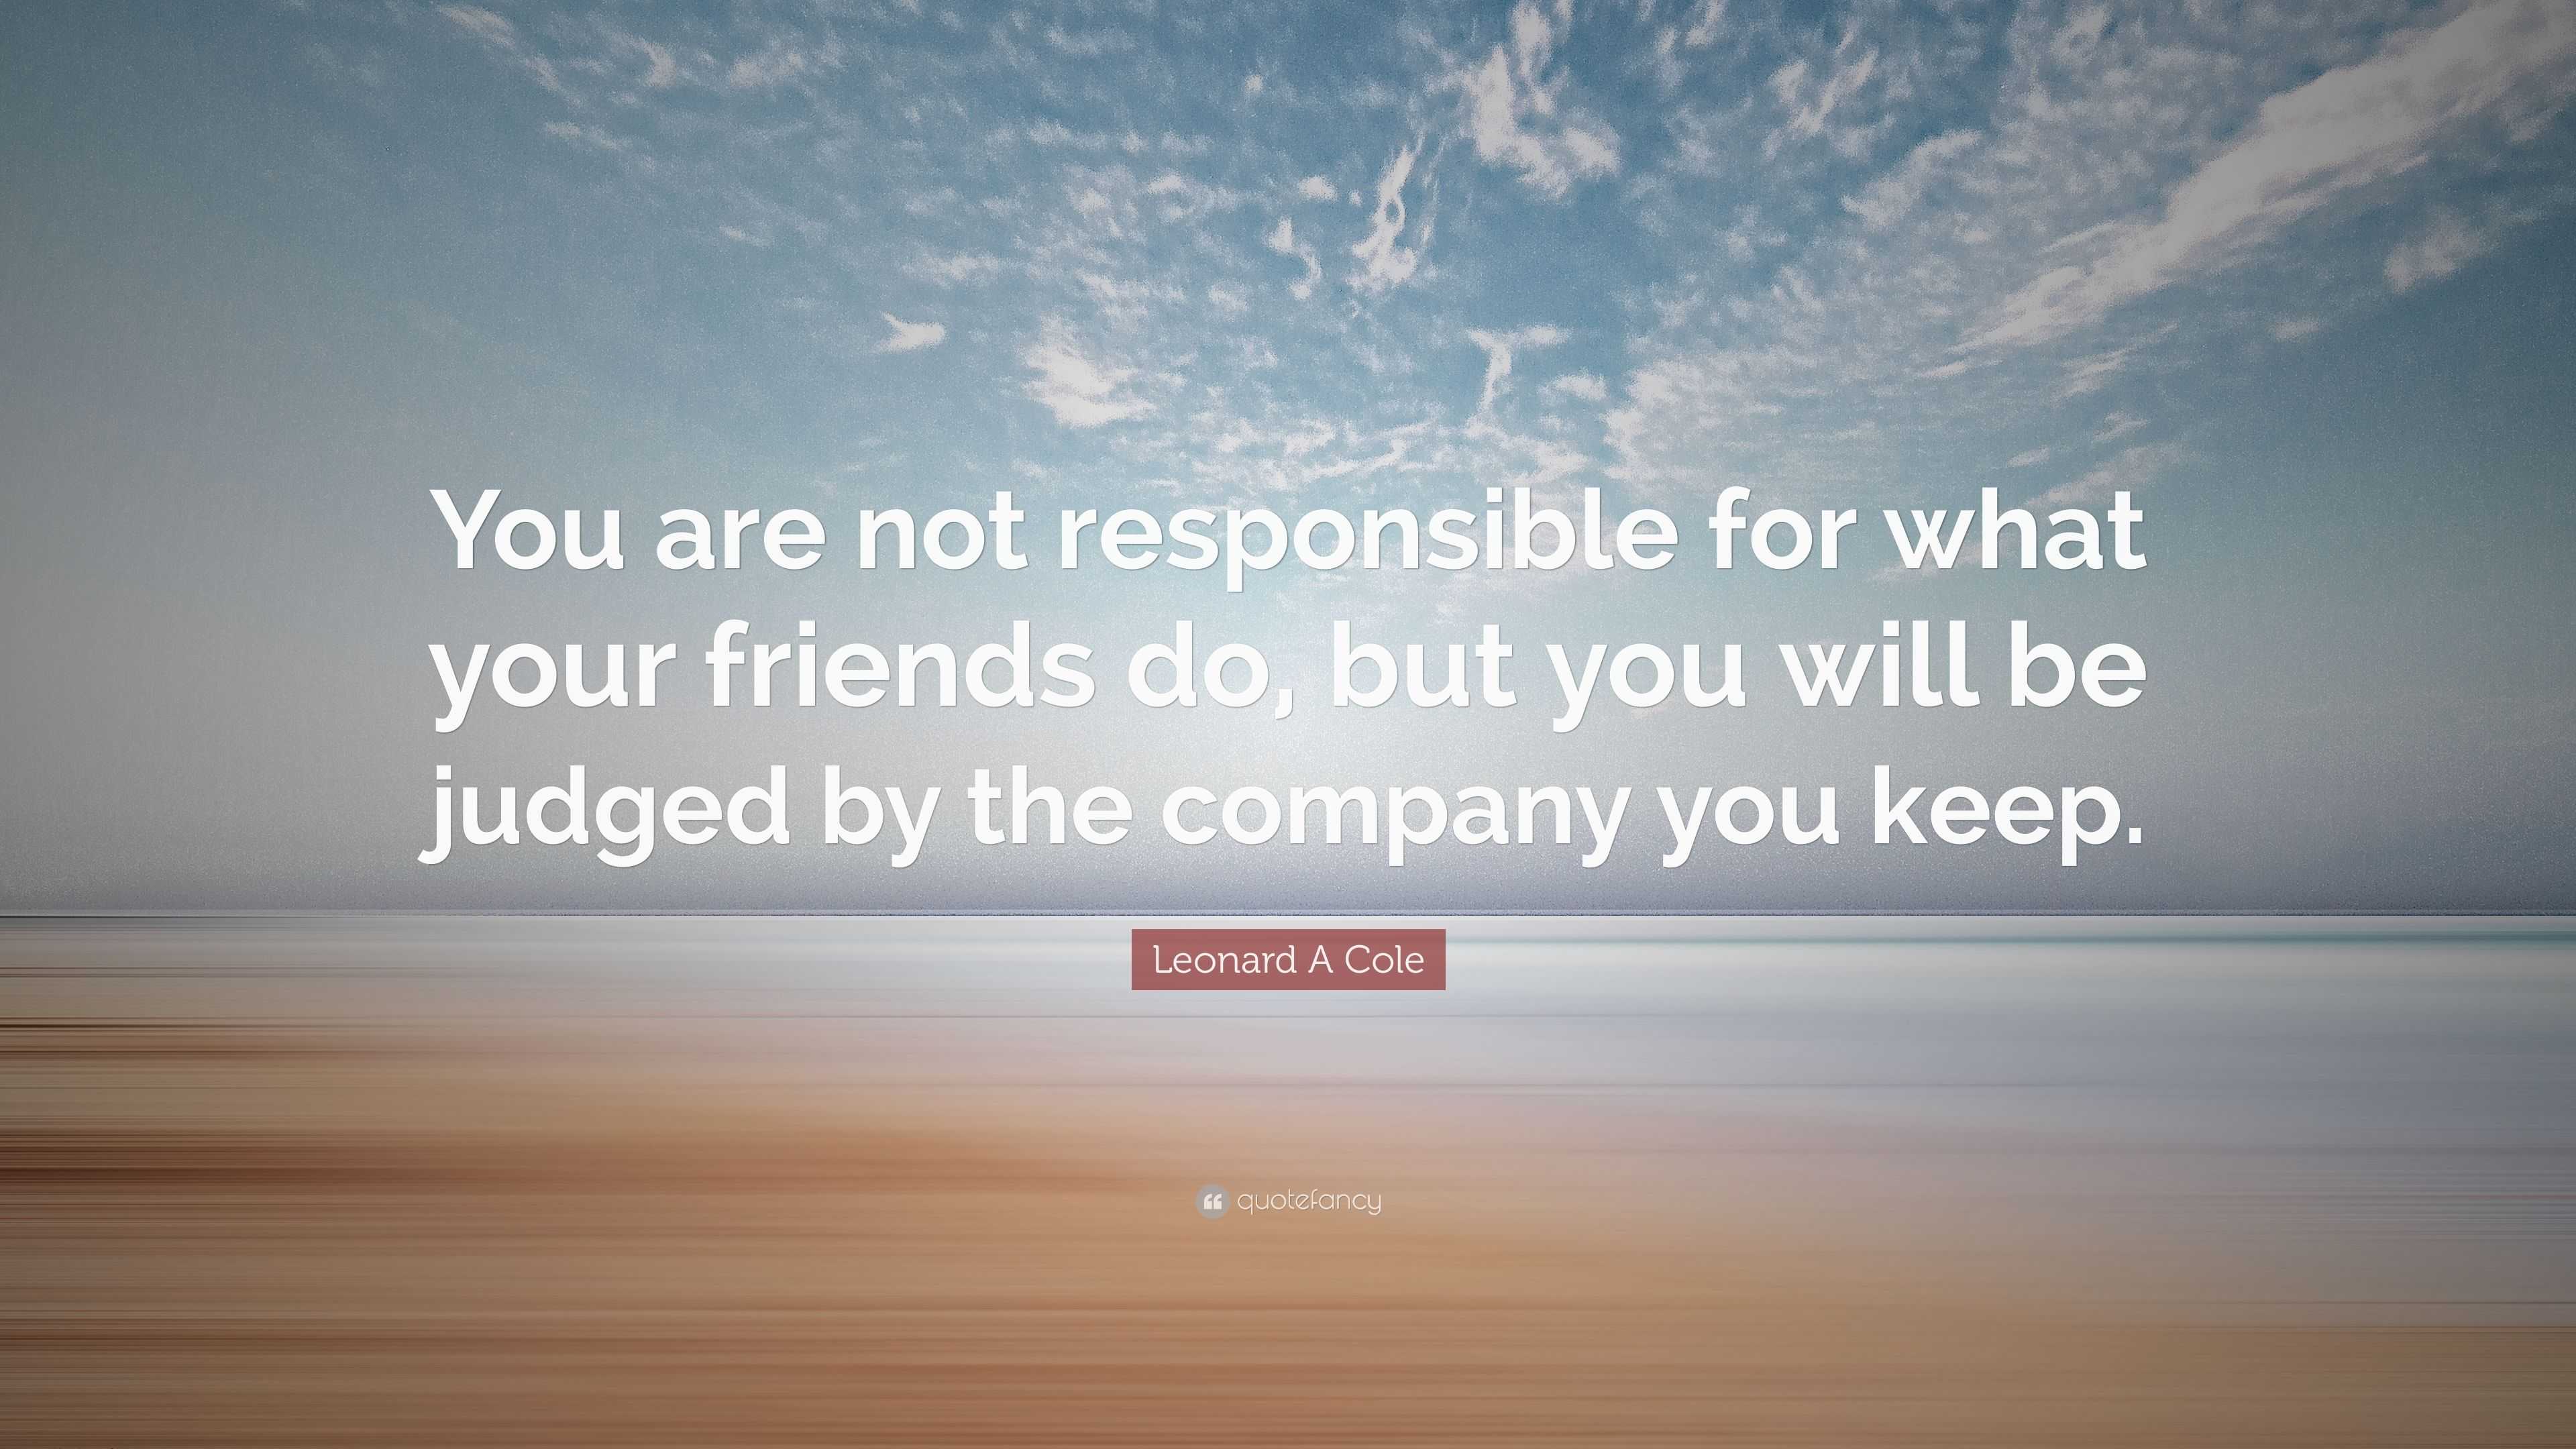 Leonard A Cole Quote: “You are not responsible for what your friends do